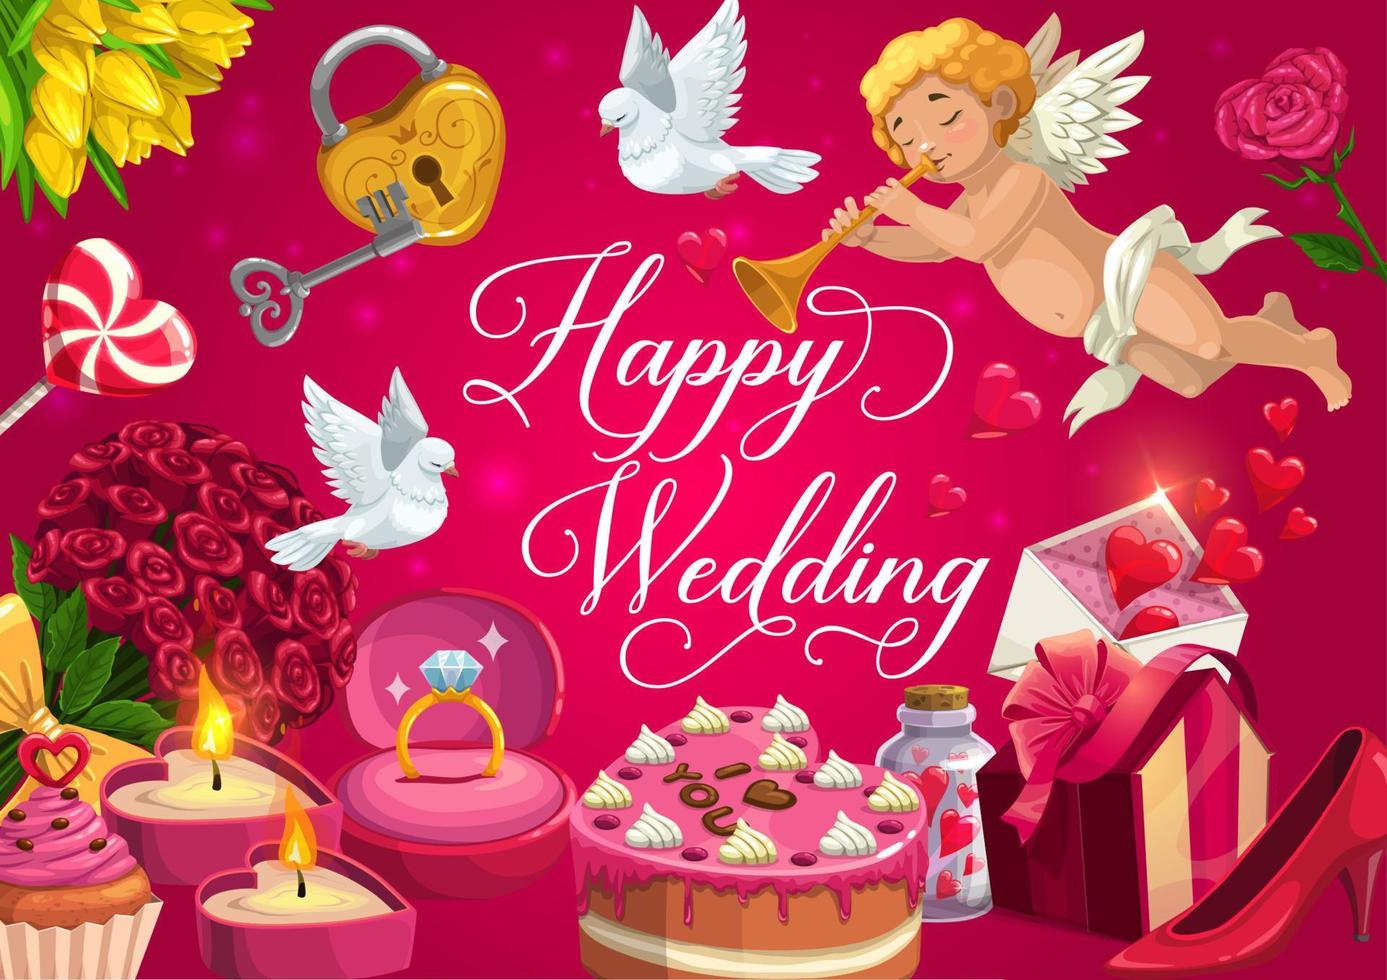 Happy wedding, marriage gifts, cake and hearts vector